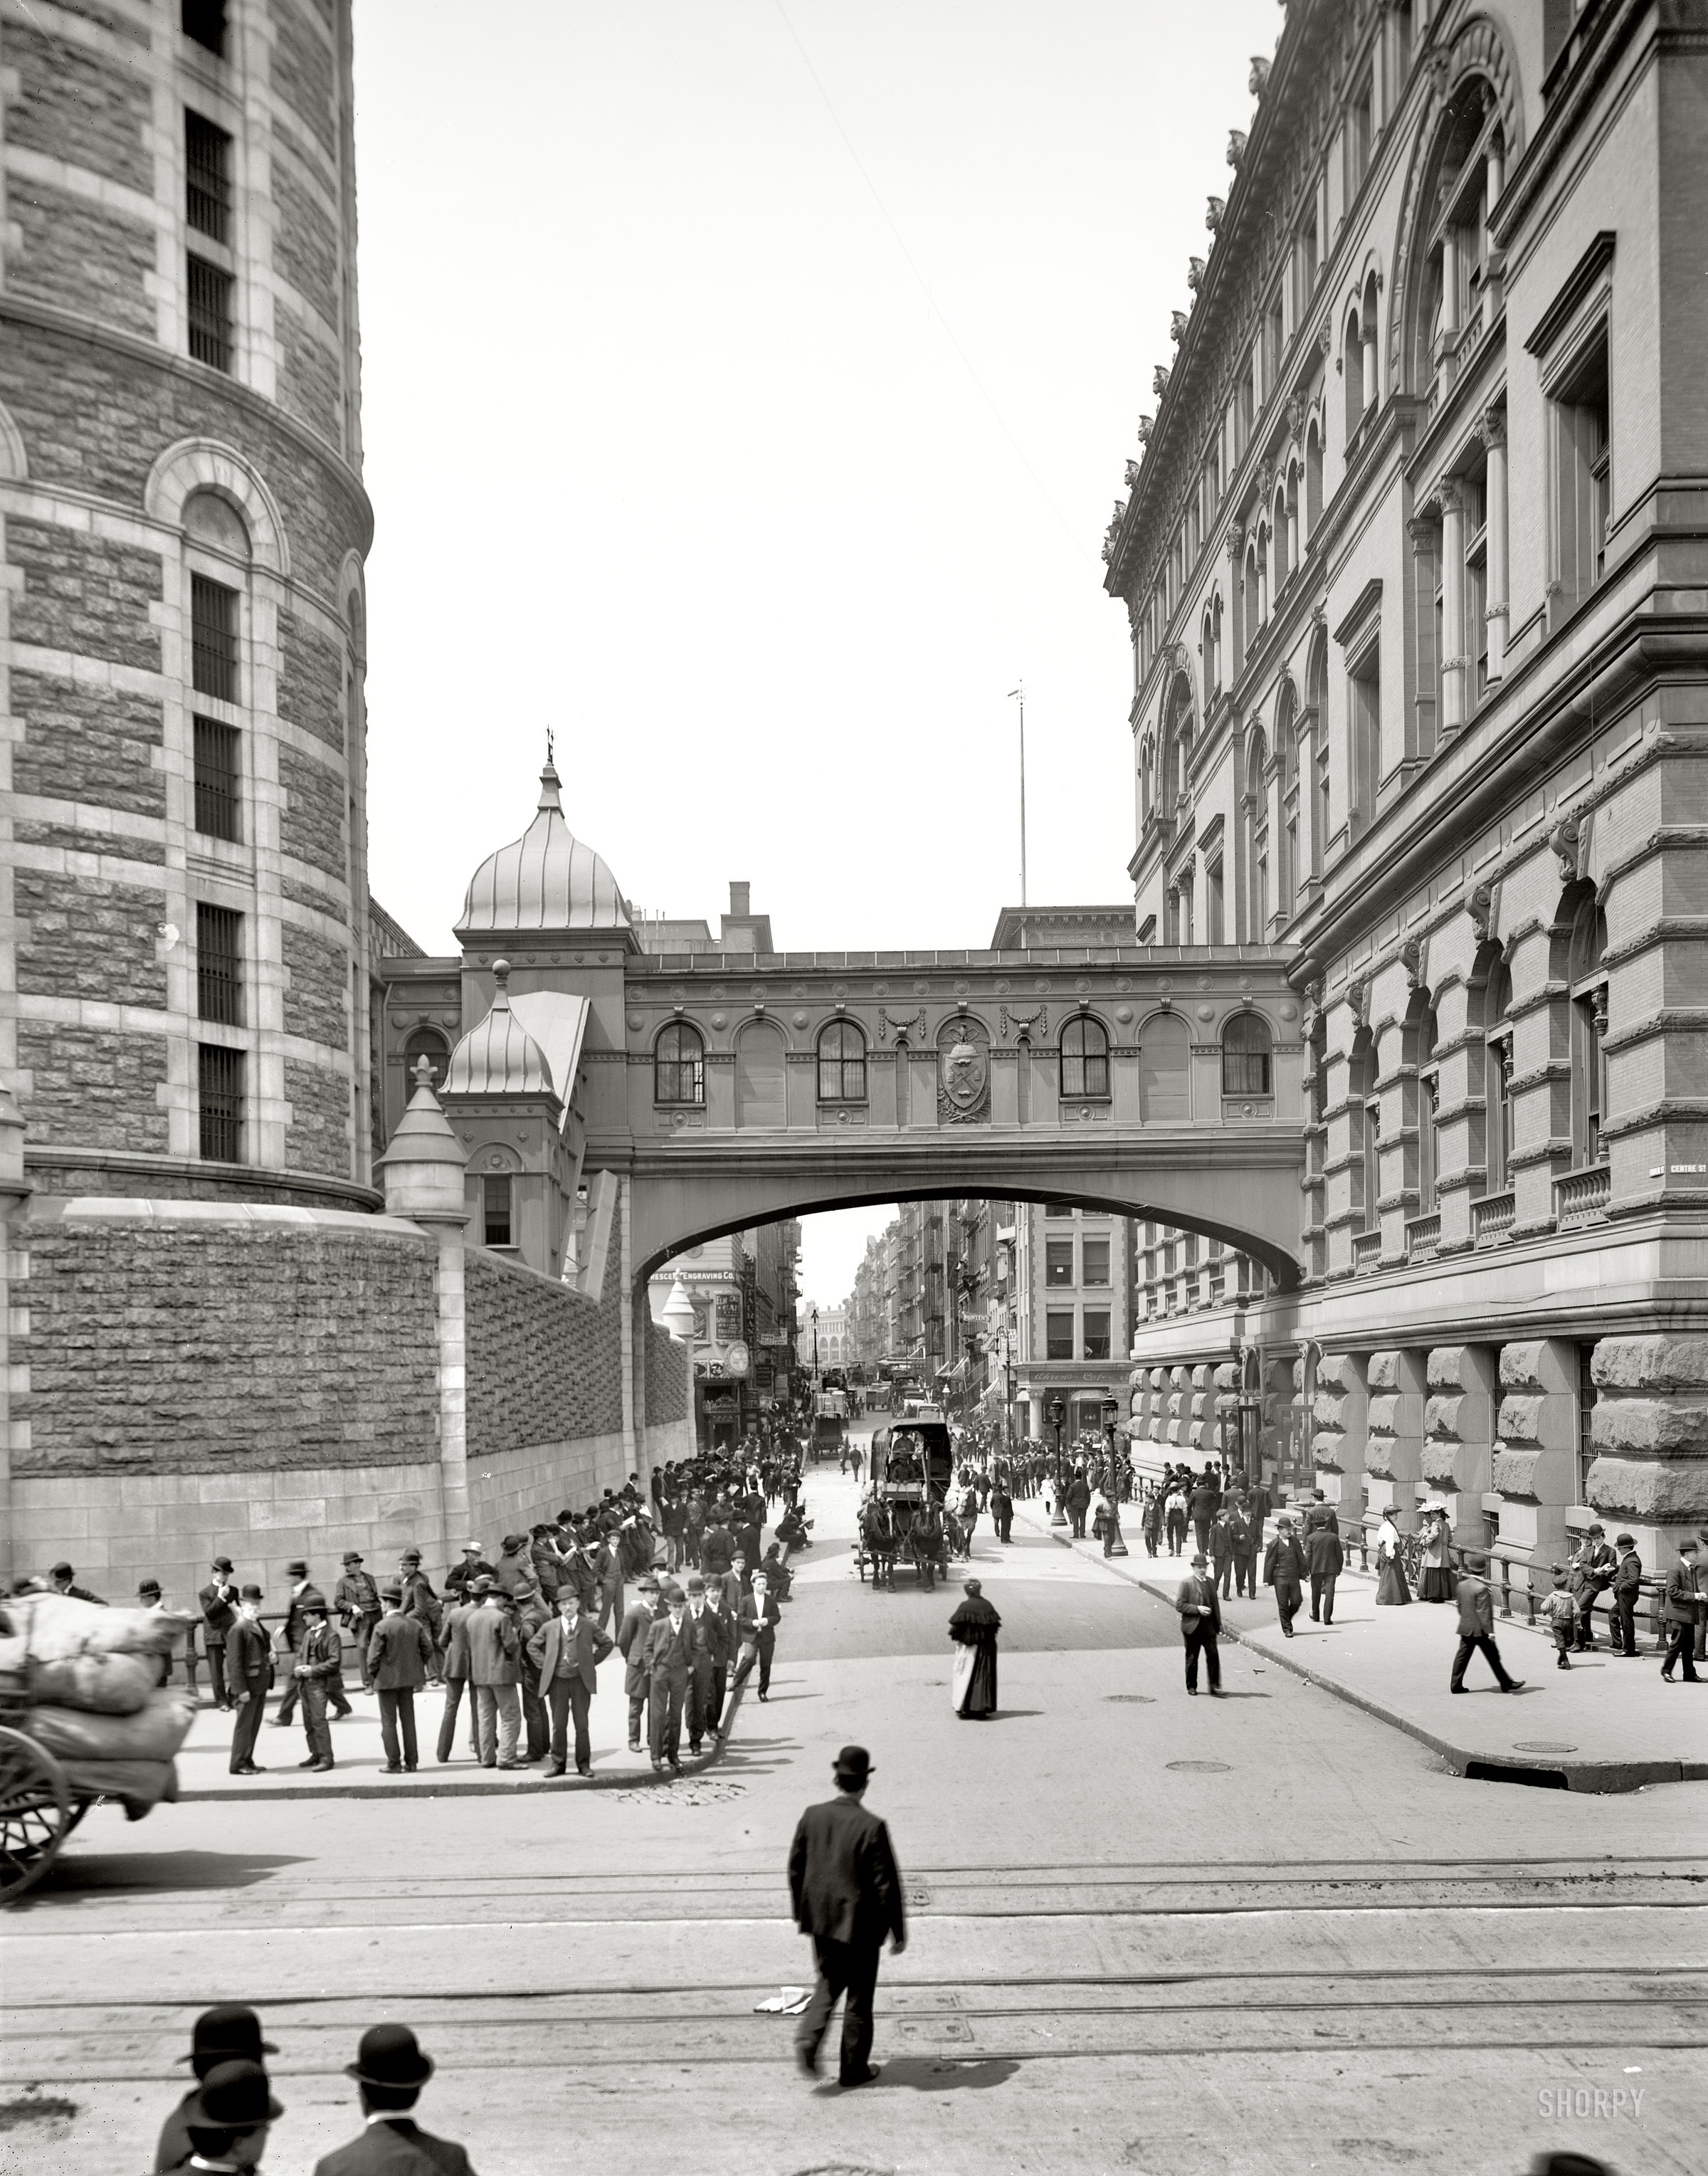 New York City circa 1905. "Bridge of Sighs." Named after a similar span in Venice, this covered passage connected the Tombs prison and Manhattan Criminal Courts building. 8x10 dry plate glass negative, Detroit Publishing Co. View full size.